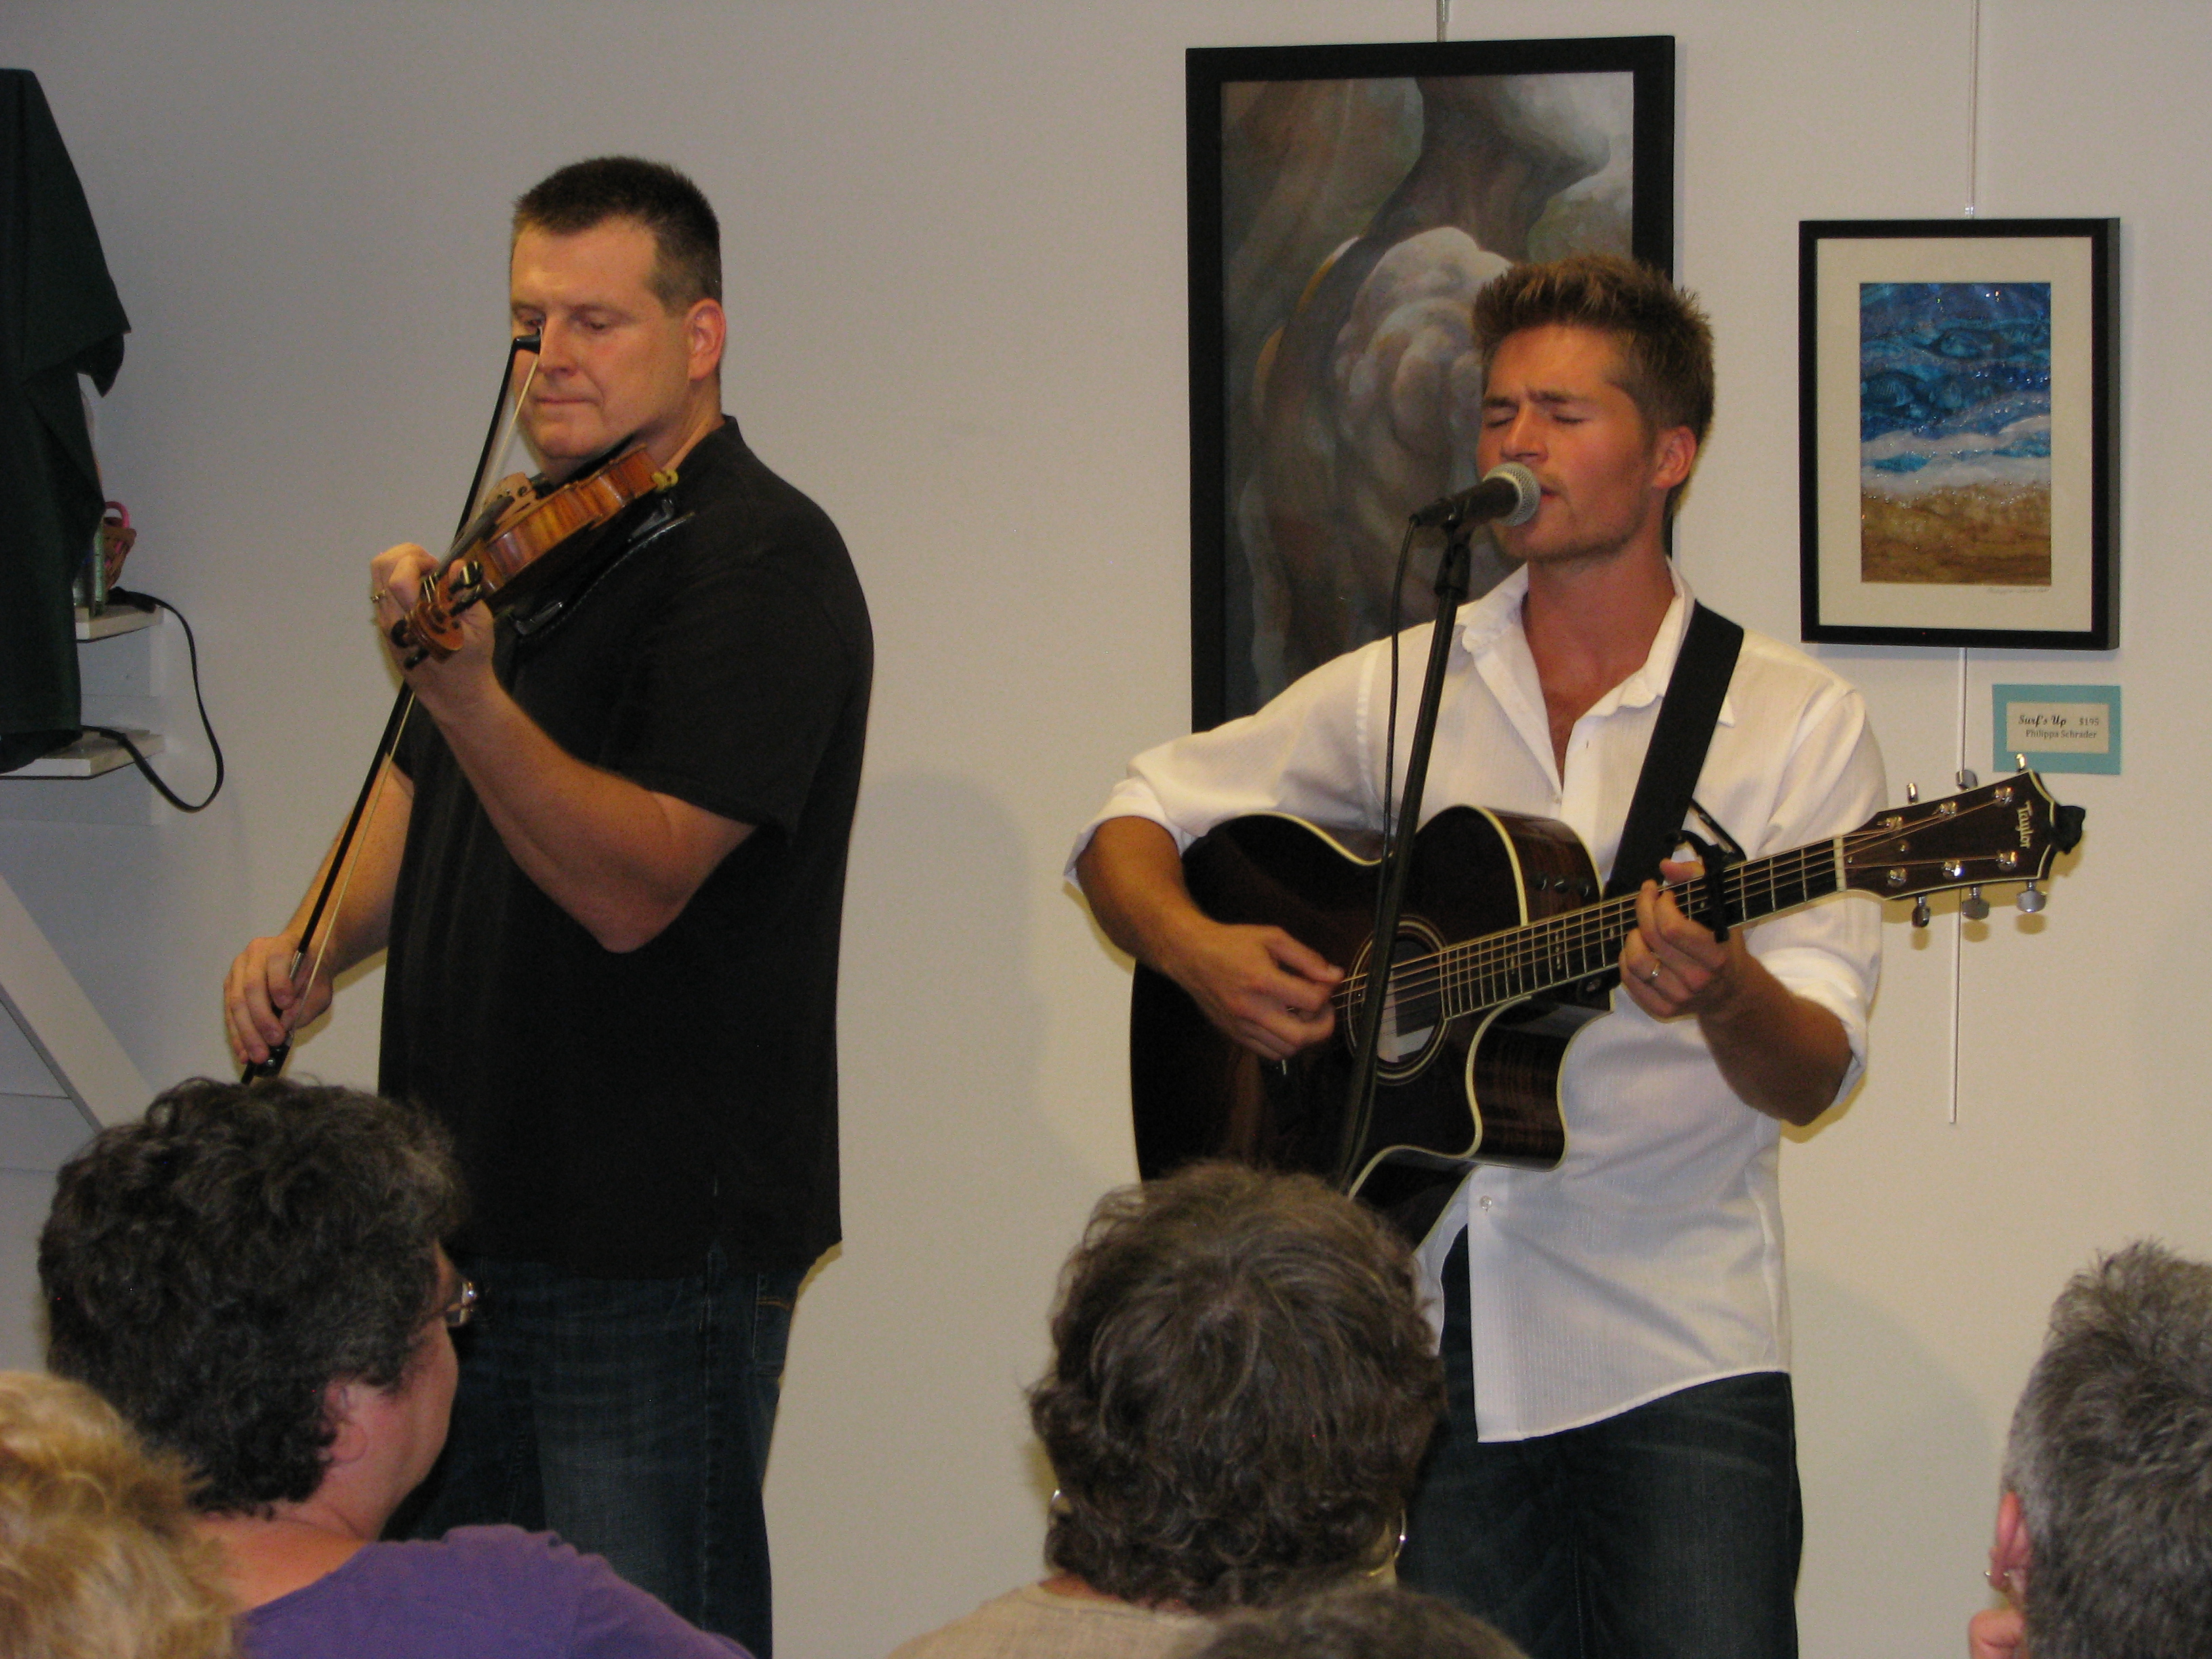 Joe Davoli and Nick Piccininni performing at Old Forge Library. Photo by Dawn Montanye